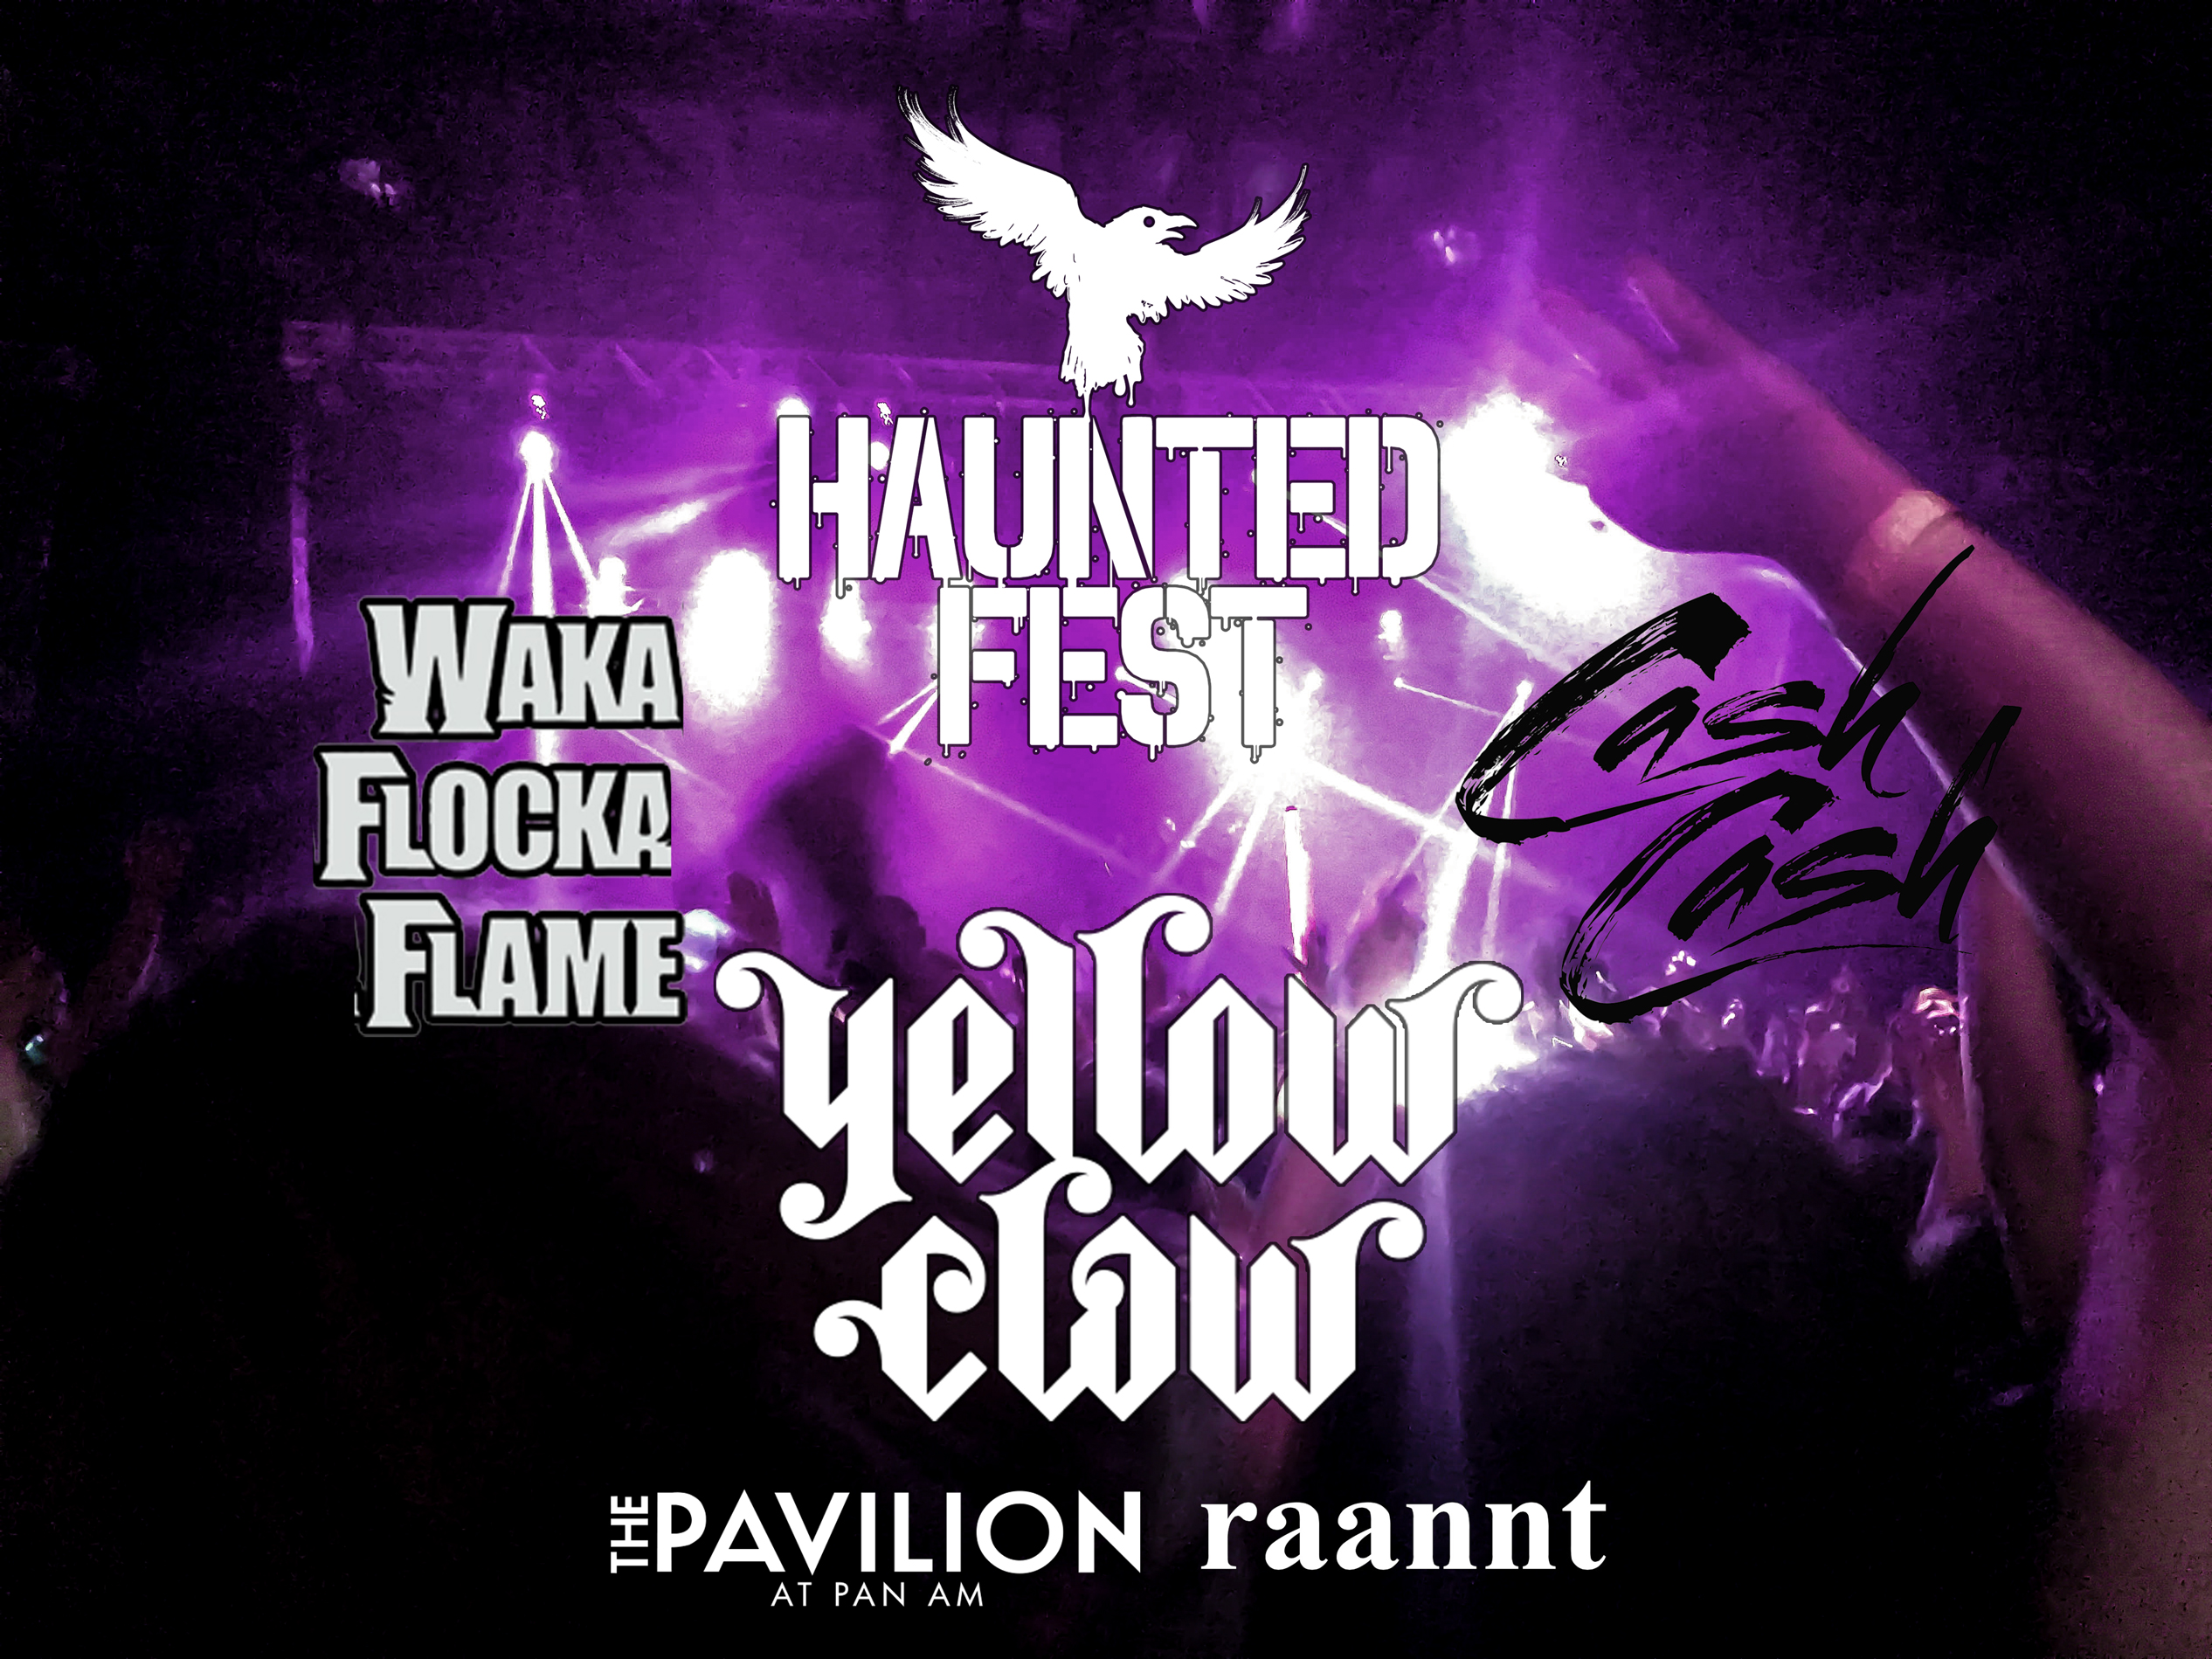 Haunted Fest Indianapolis Indiana Halloween Rave with Cash Cash Waka Flocka Flame and Yellow Claw